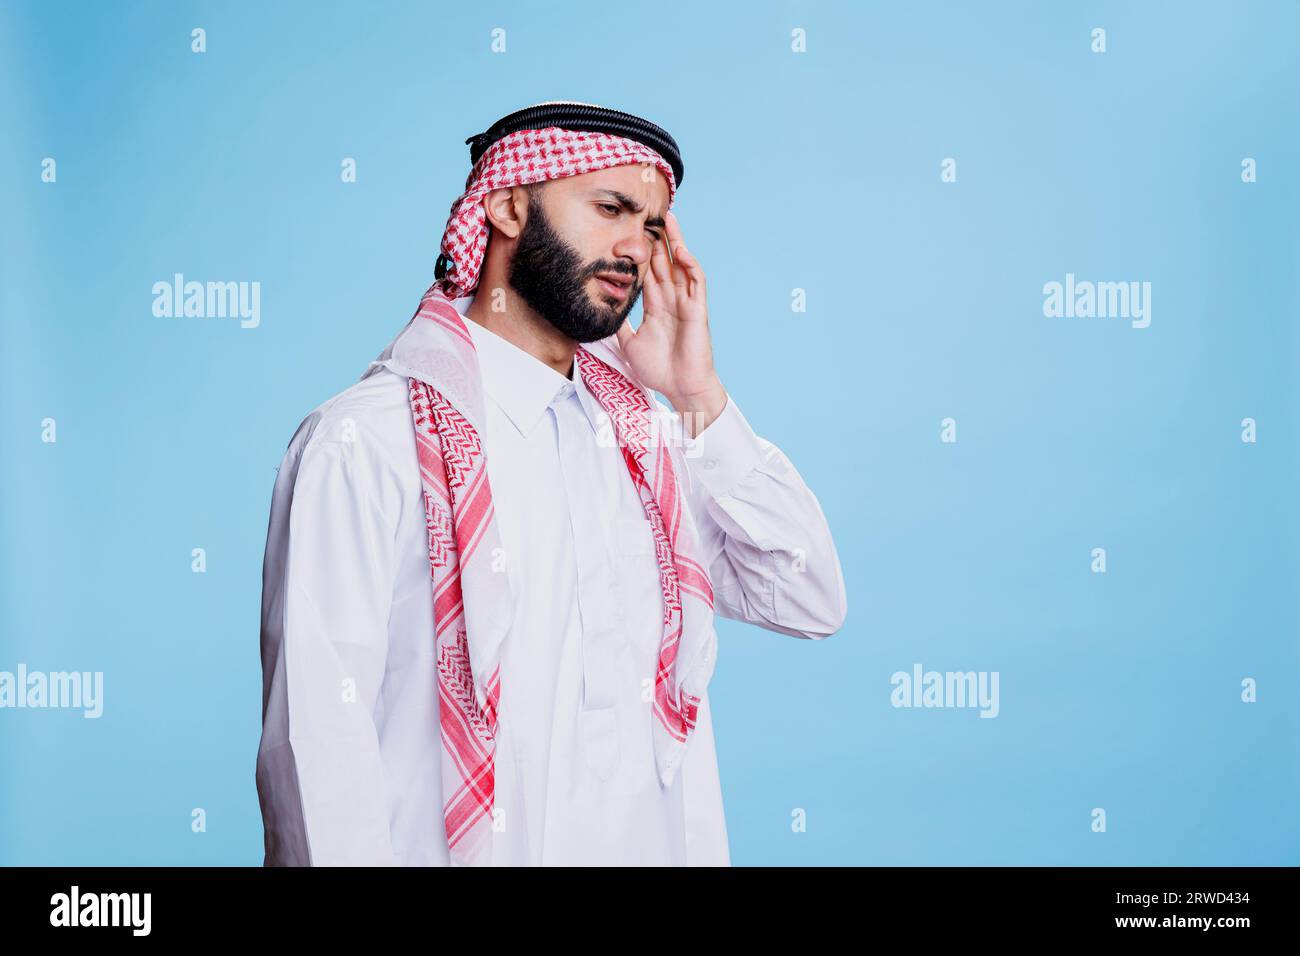 Muslim man wearing traditional clothes suffering from migraine and rubbing temple. Arab person in thobe and headscarf touching head while having headache and posing in studio Stock Photo